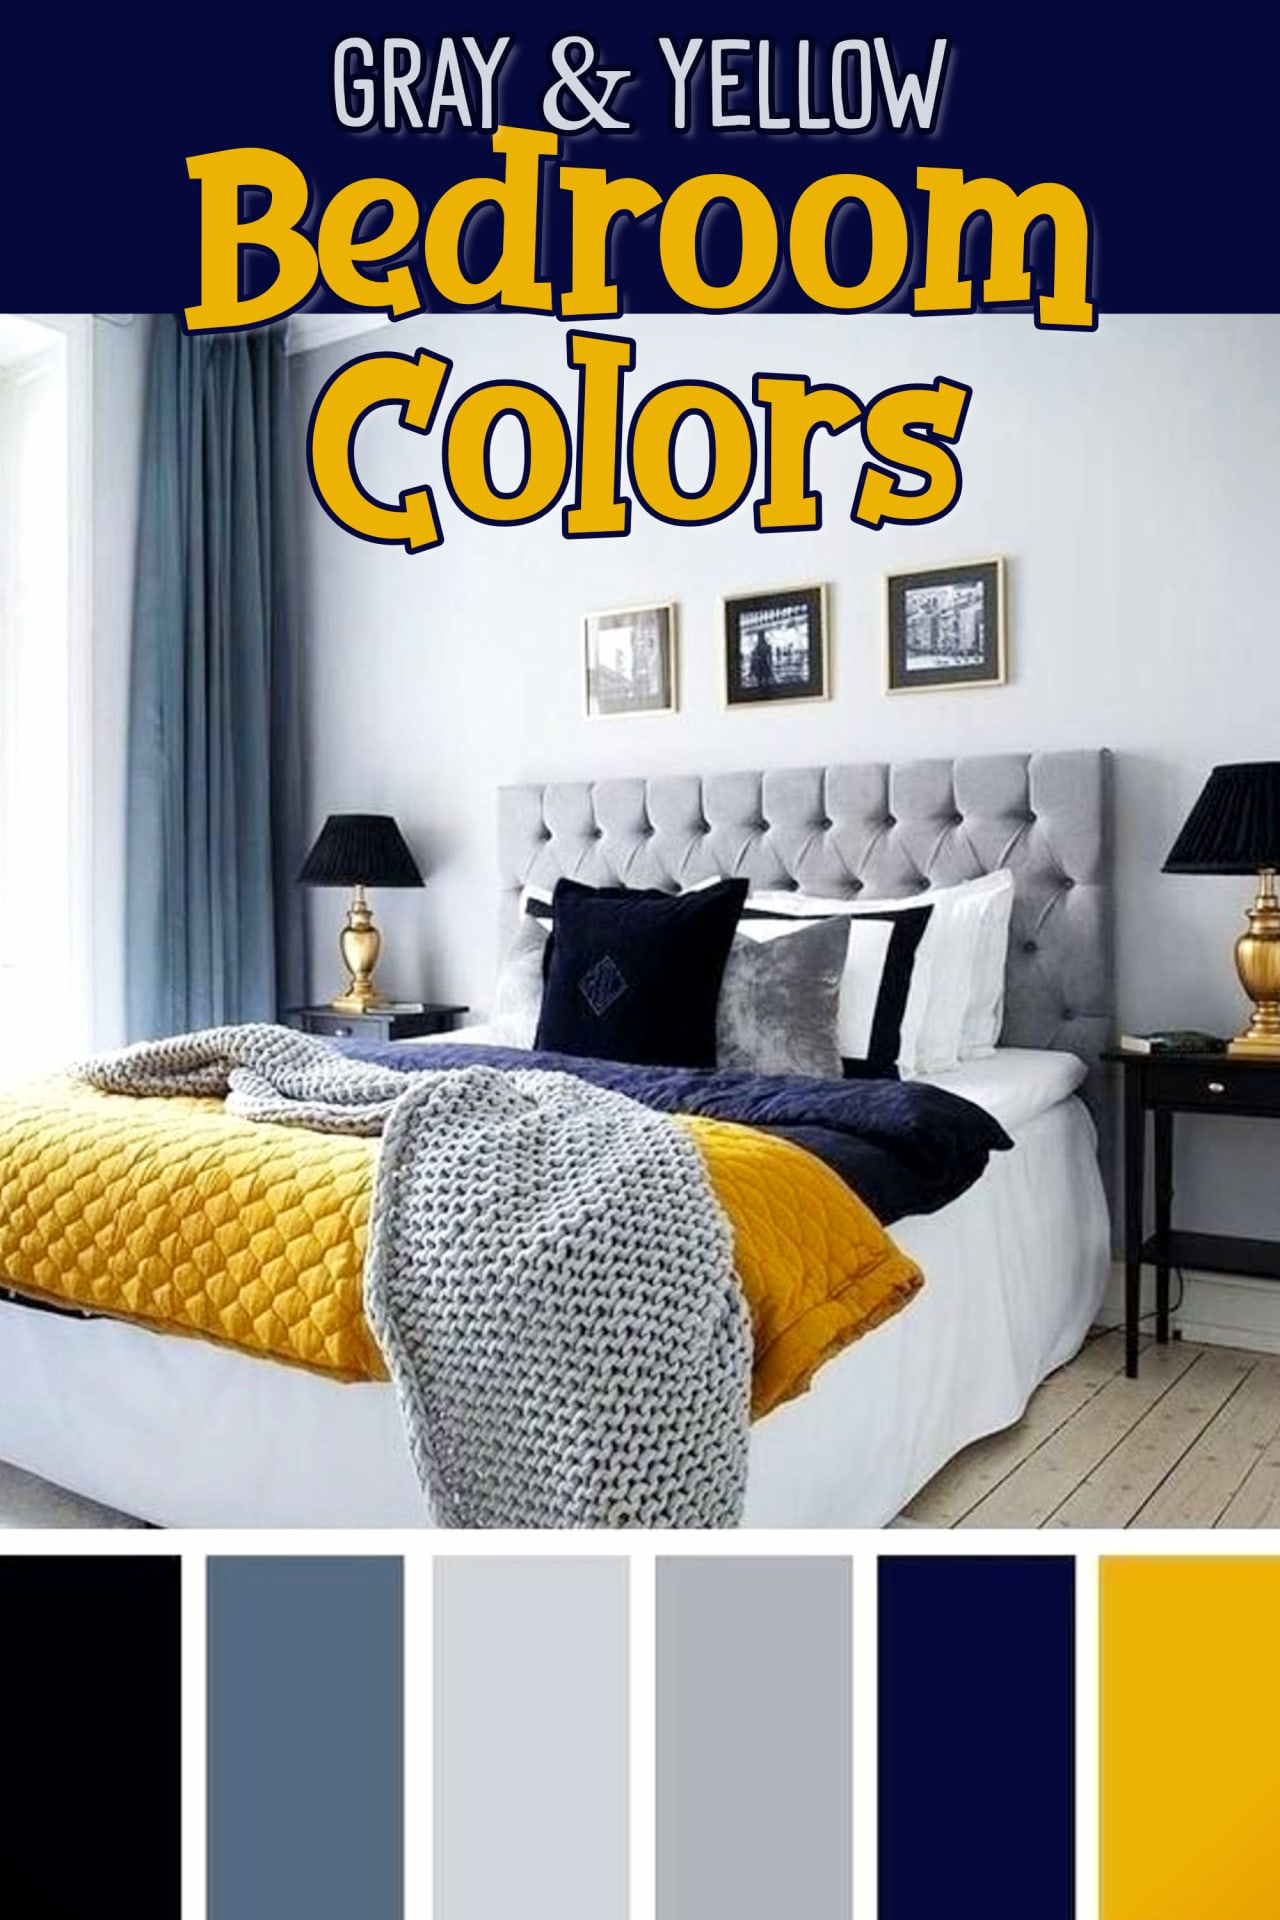 Bedroom accent colors for a gray and yellow bedroom - gray, yellow, blue and navy blue bedroom decorating ideas- beautiful master suite bedroom colors, dorm room colors or a teen bedroom color scheme.  Really brightens up a small apartment bedroom too!